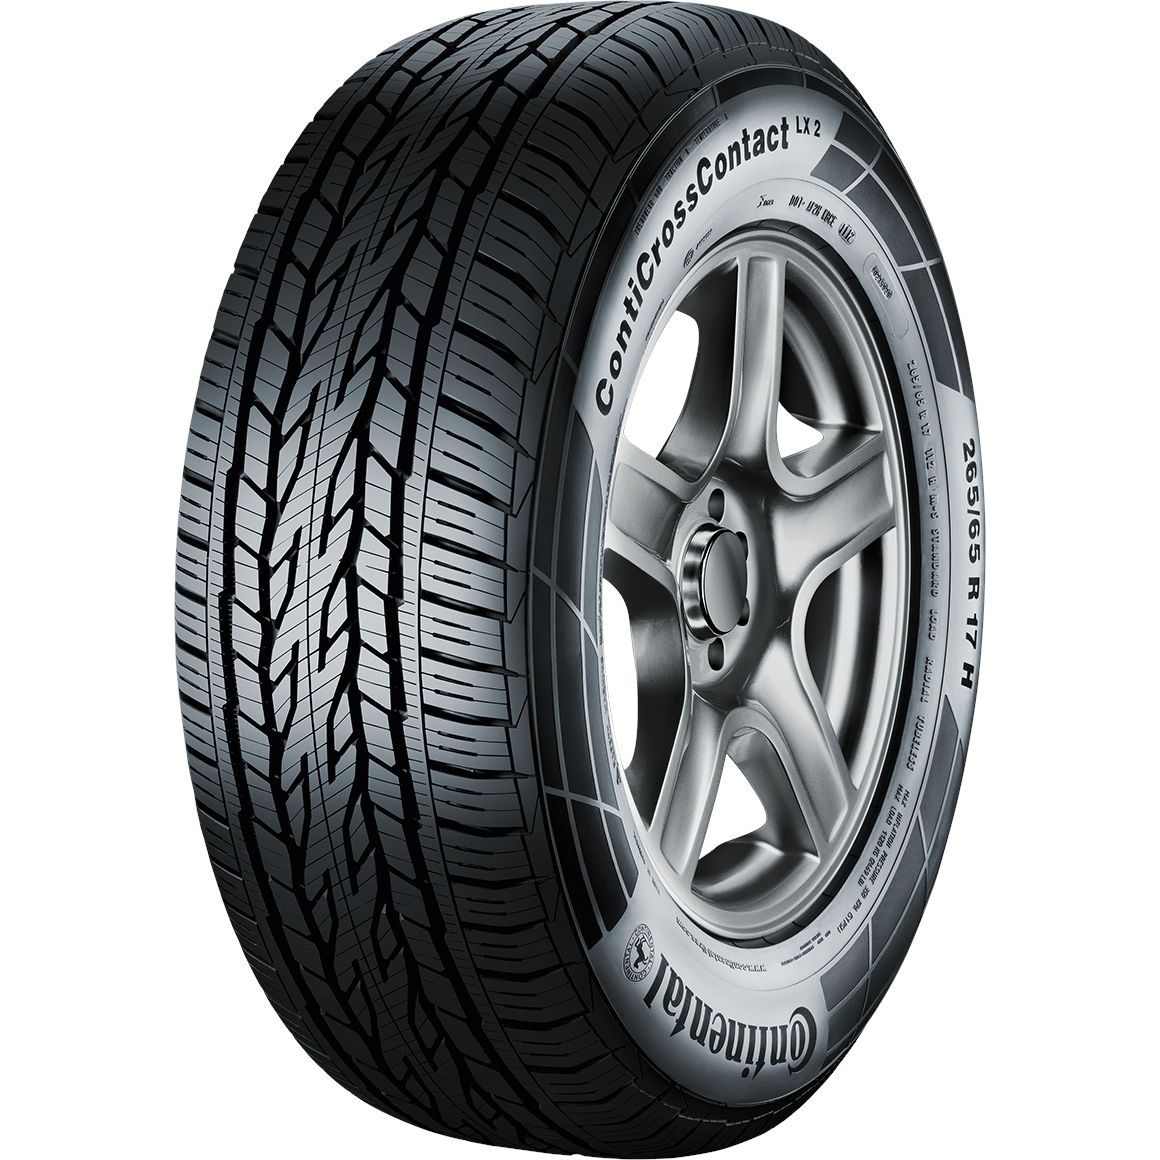 CONTINENTAL 215/65R16 98H ContiCrossContact LX 2 FR BSW M+S